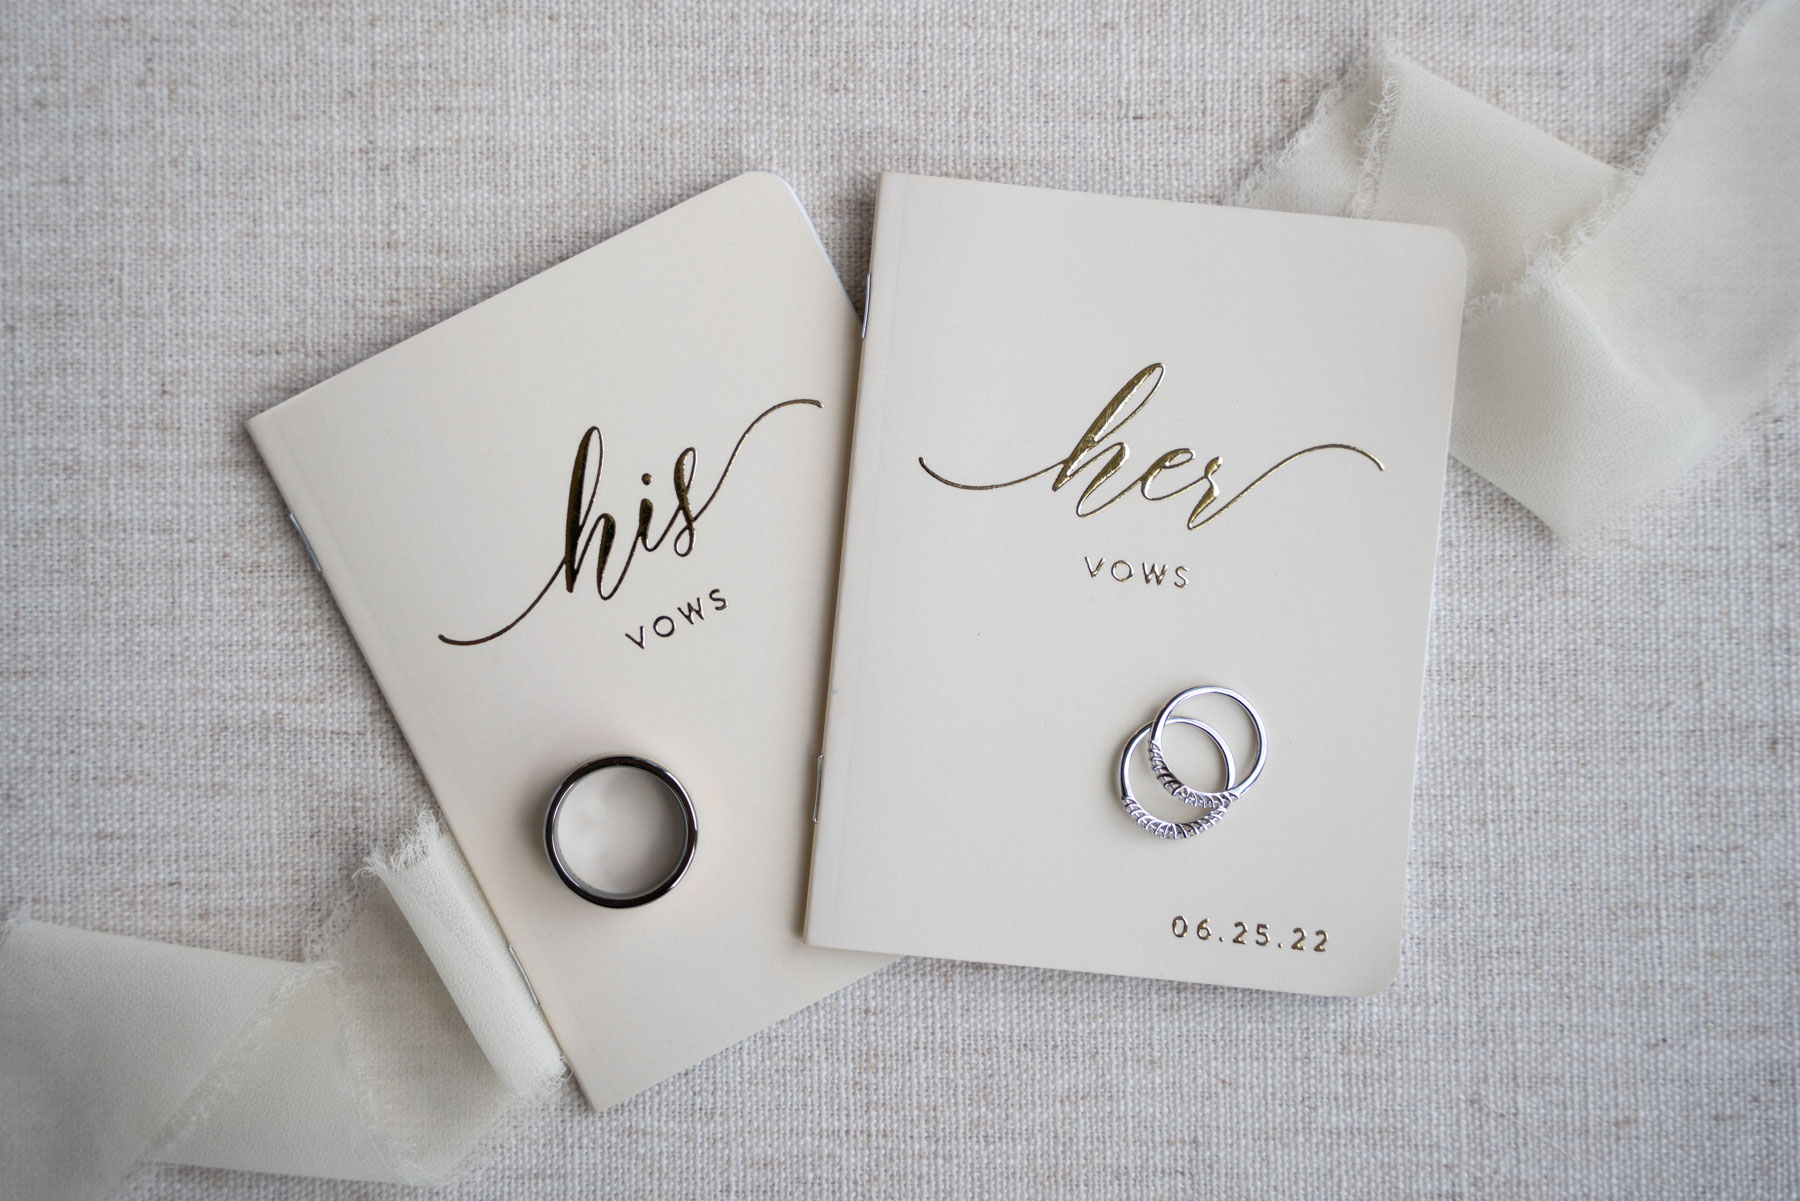 Wedding vows and rings